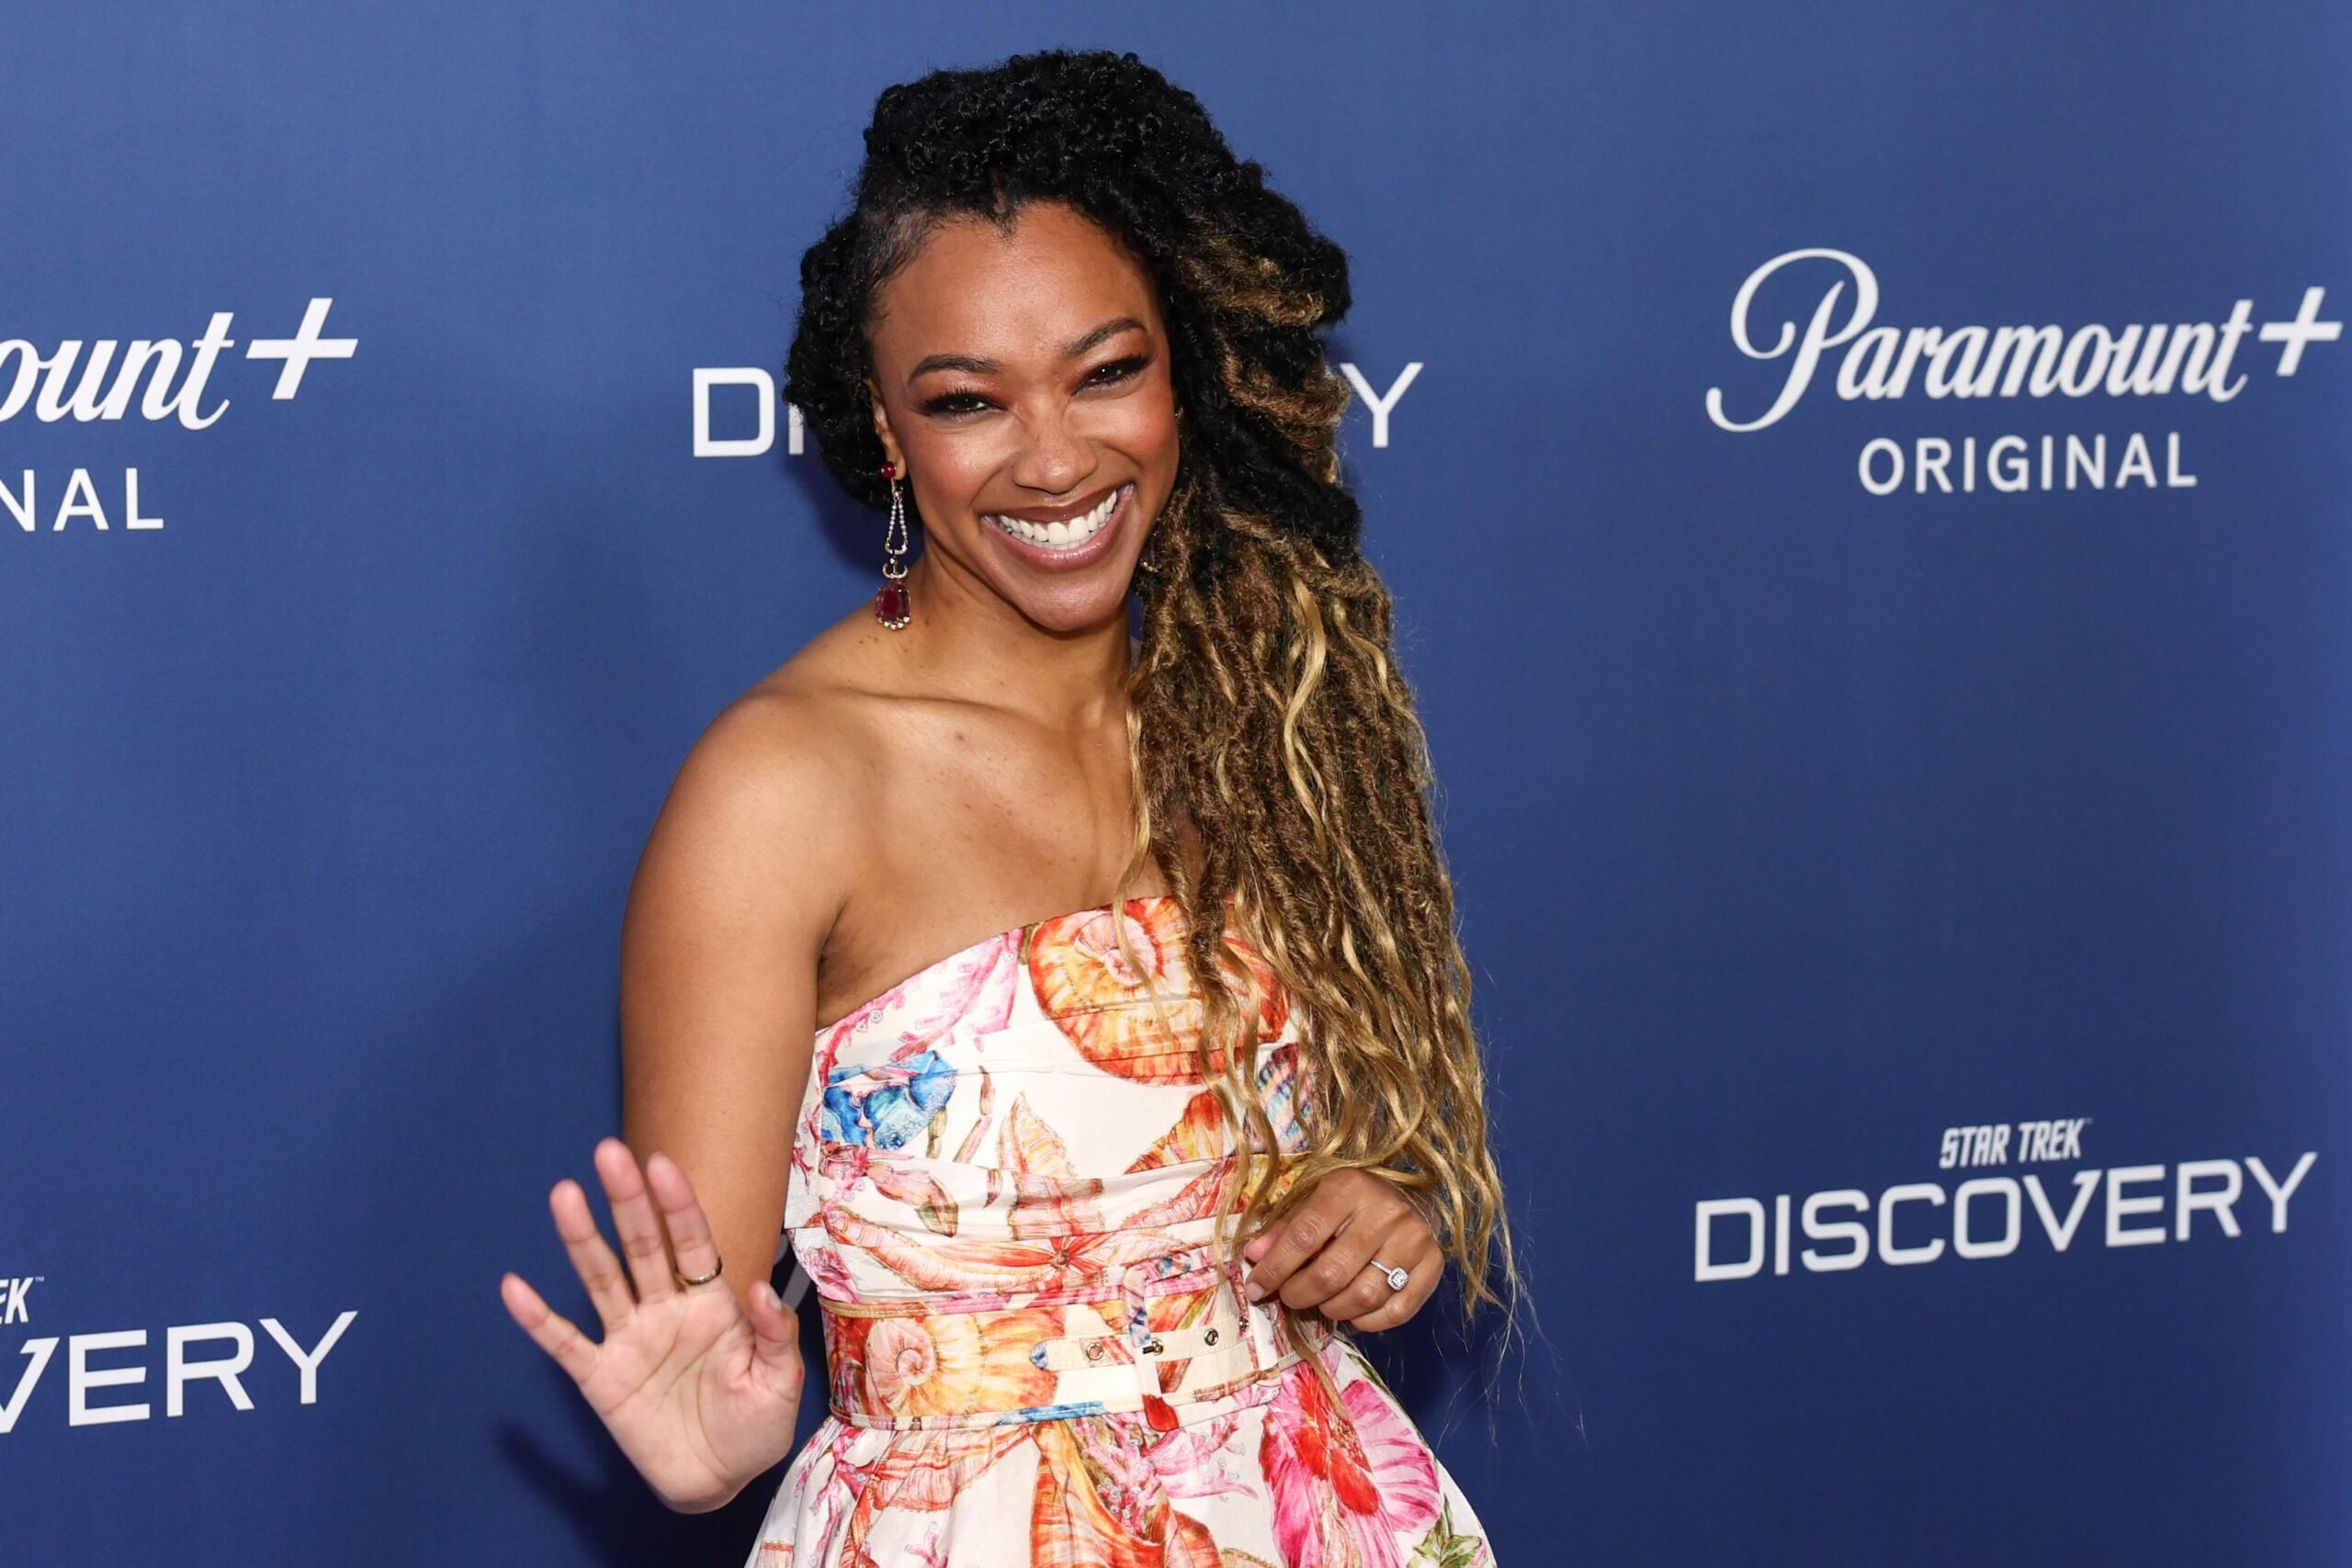 Star Trek: Discovery star Sonequa Martin-Green laughs and smiles on the red carpet